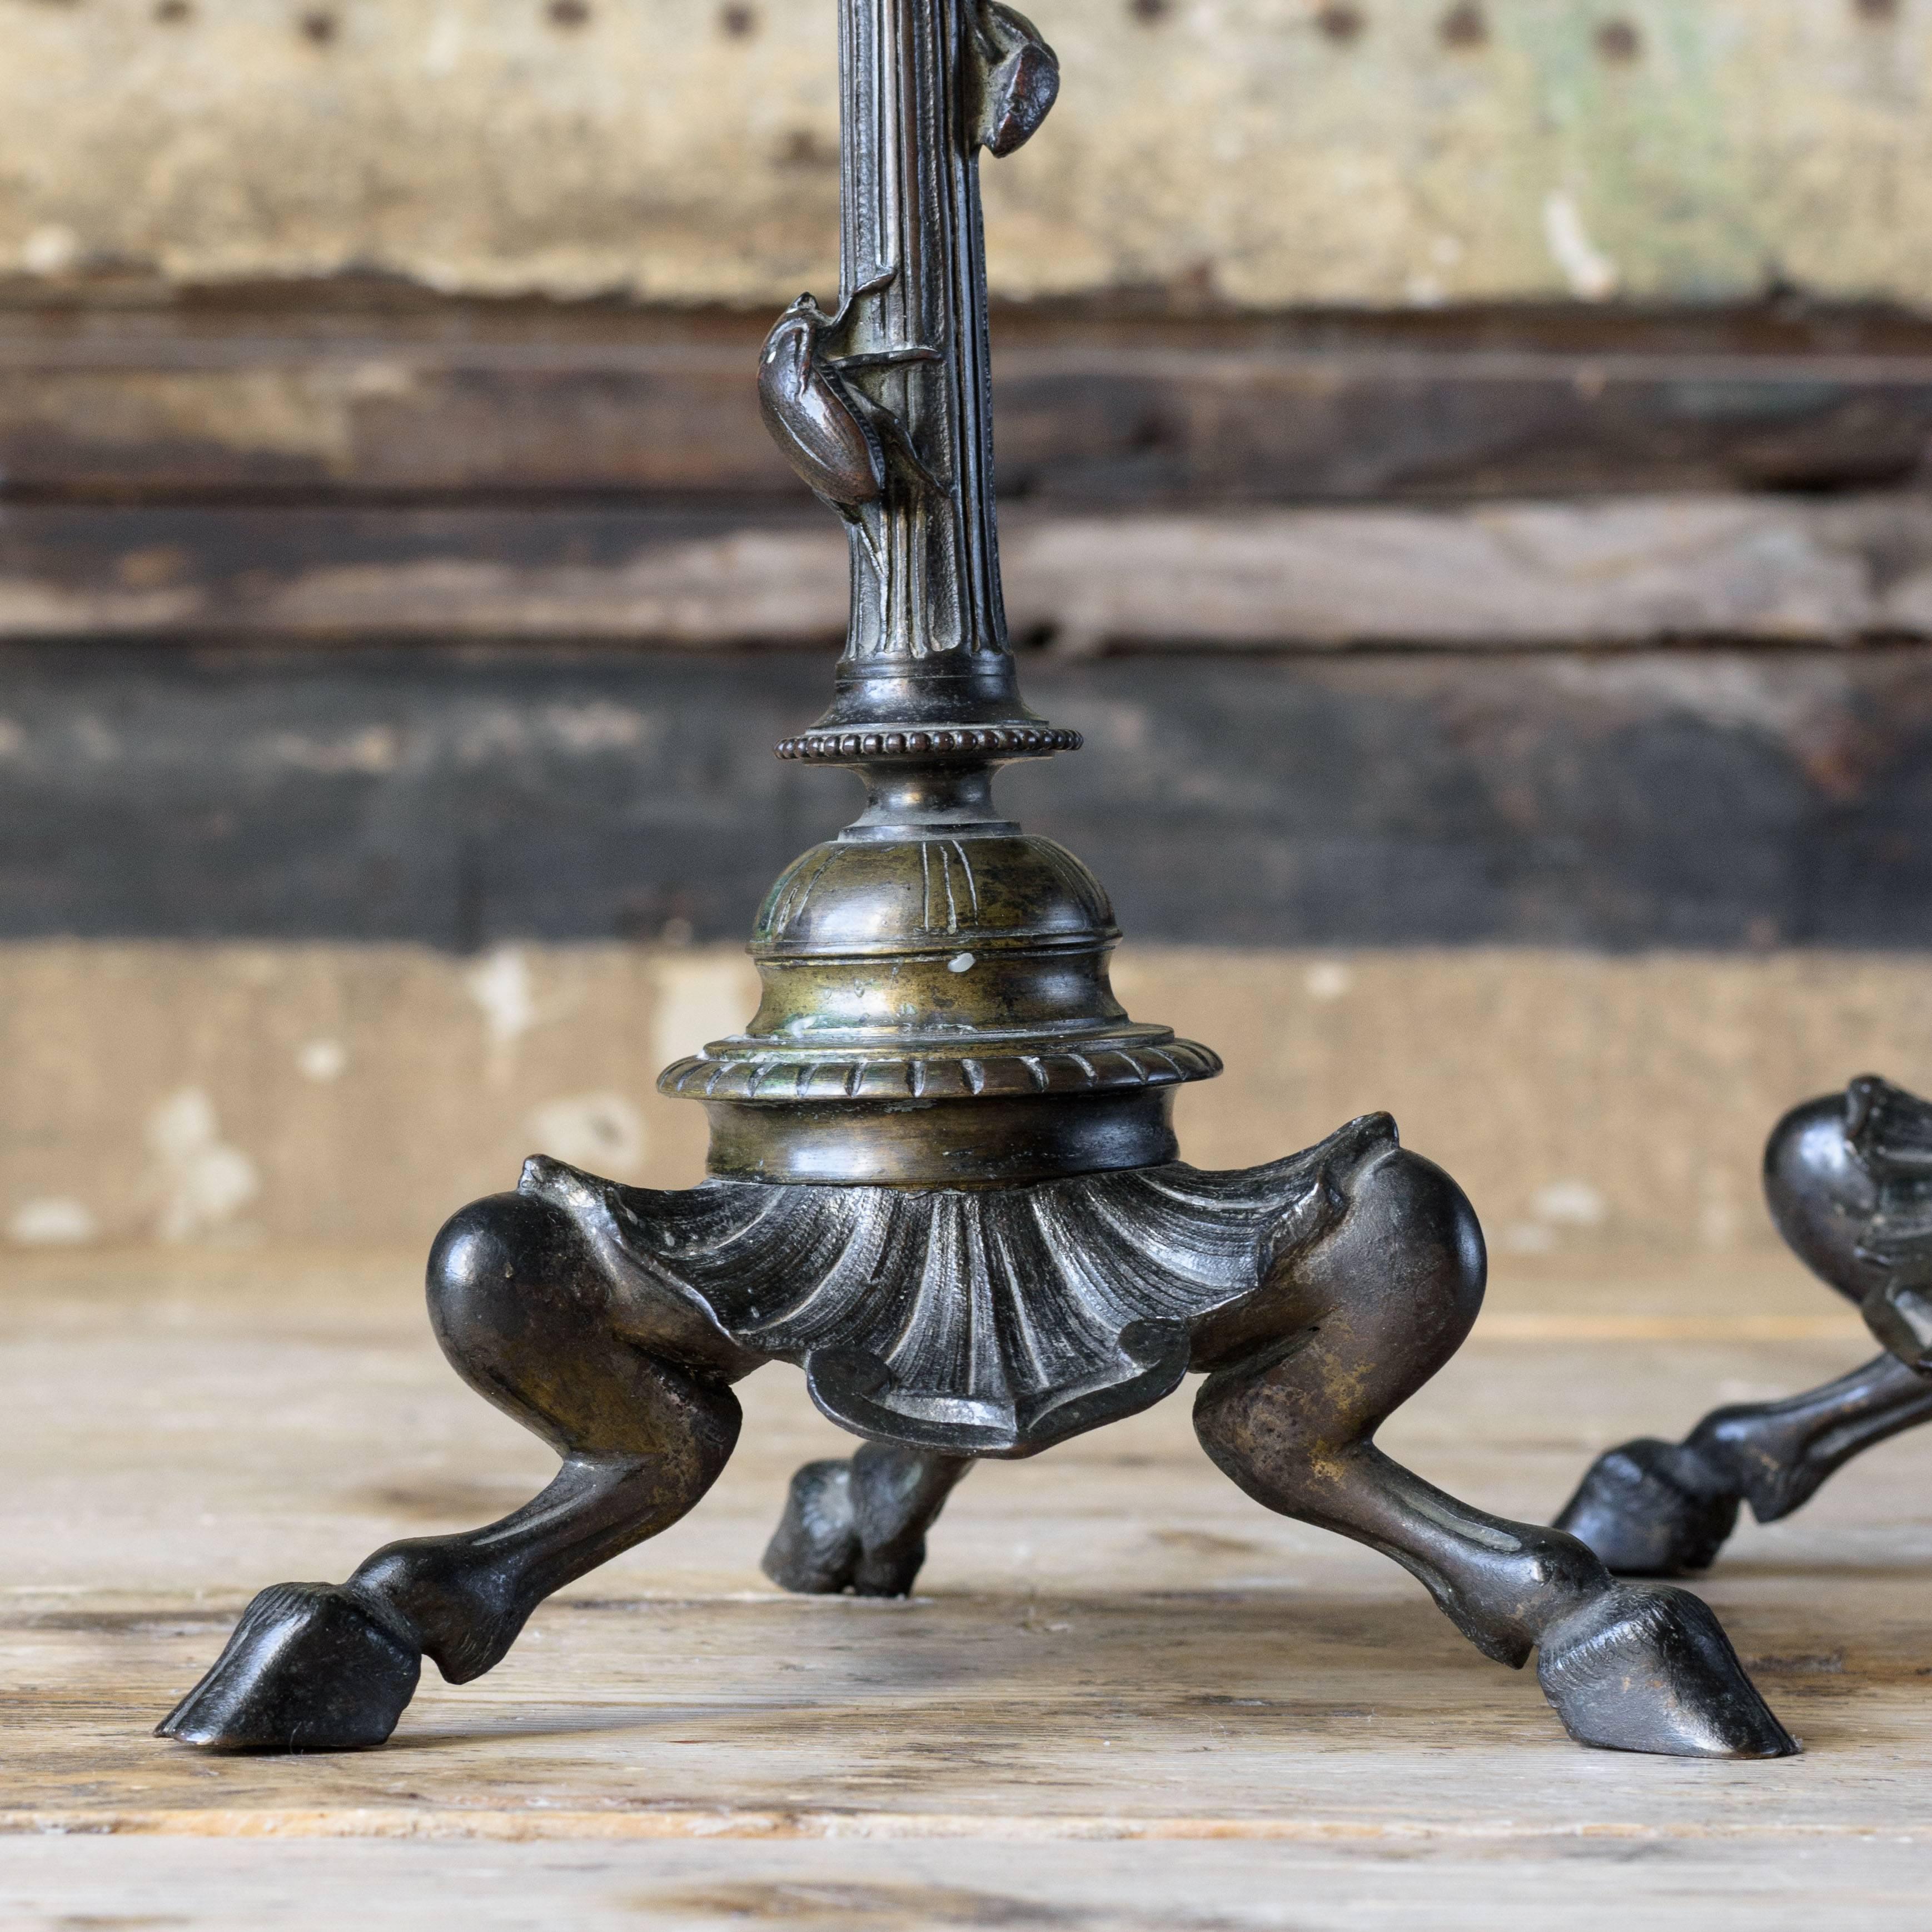 Pair of French bronze candlesticks, circa 1880, the sconces with cast leaf details above tapered and fluted columns with beetles, on cloven hoof triform base.